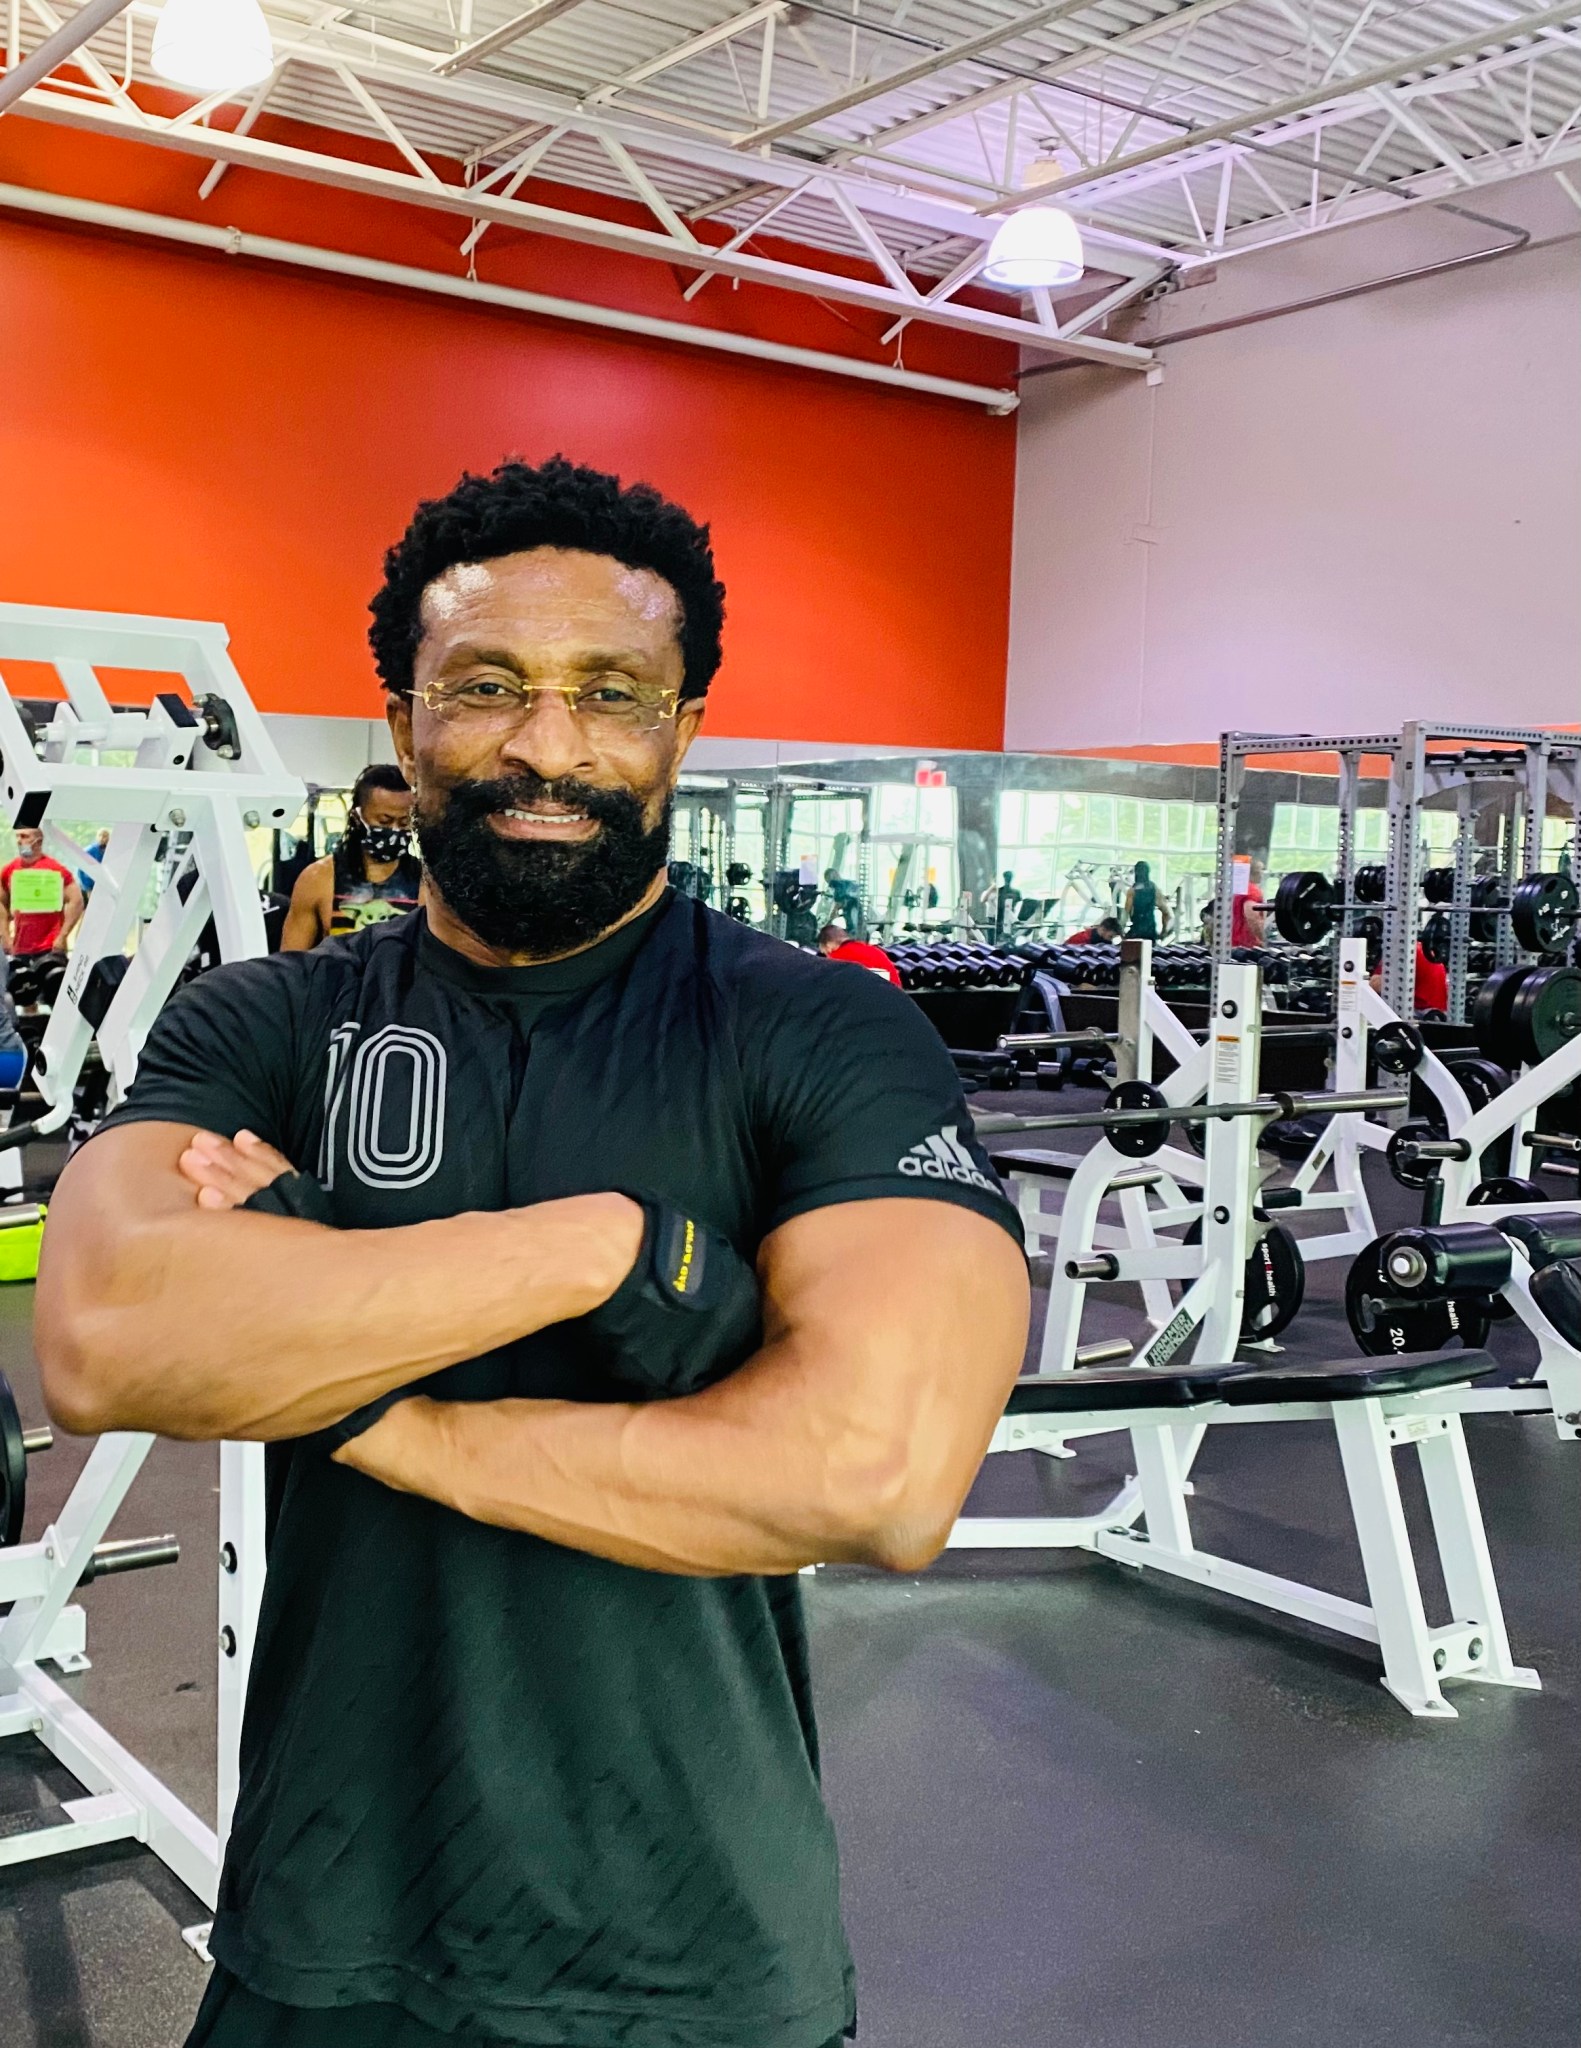 Moses Adoko, a man with short, curly black hair and beard, smiles and stands with arms crossed in a large gym. He wears a fitted black tee with the number 10, black fingerless gloves, and small rimless glasses. The gym wall is bright orange.